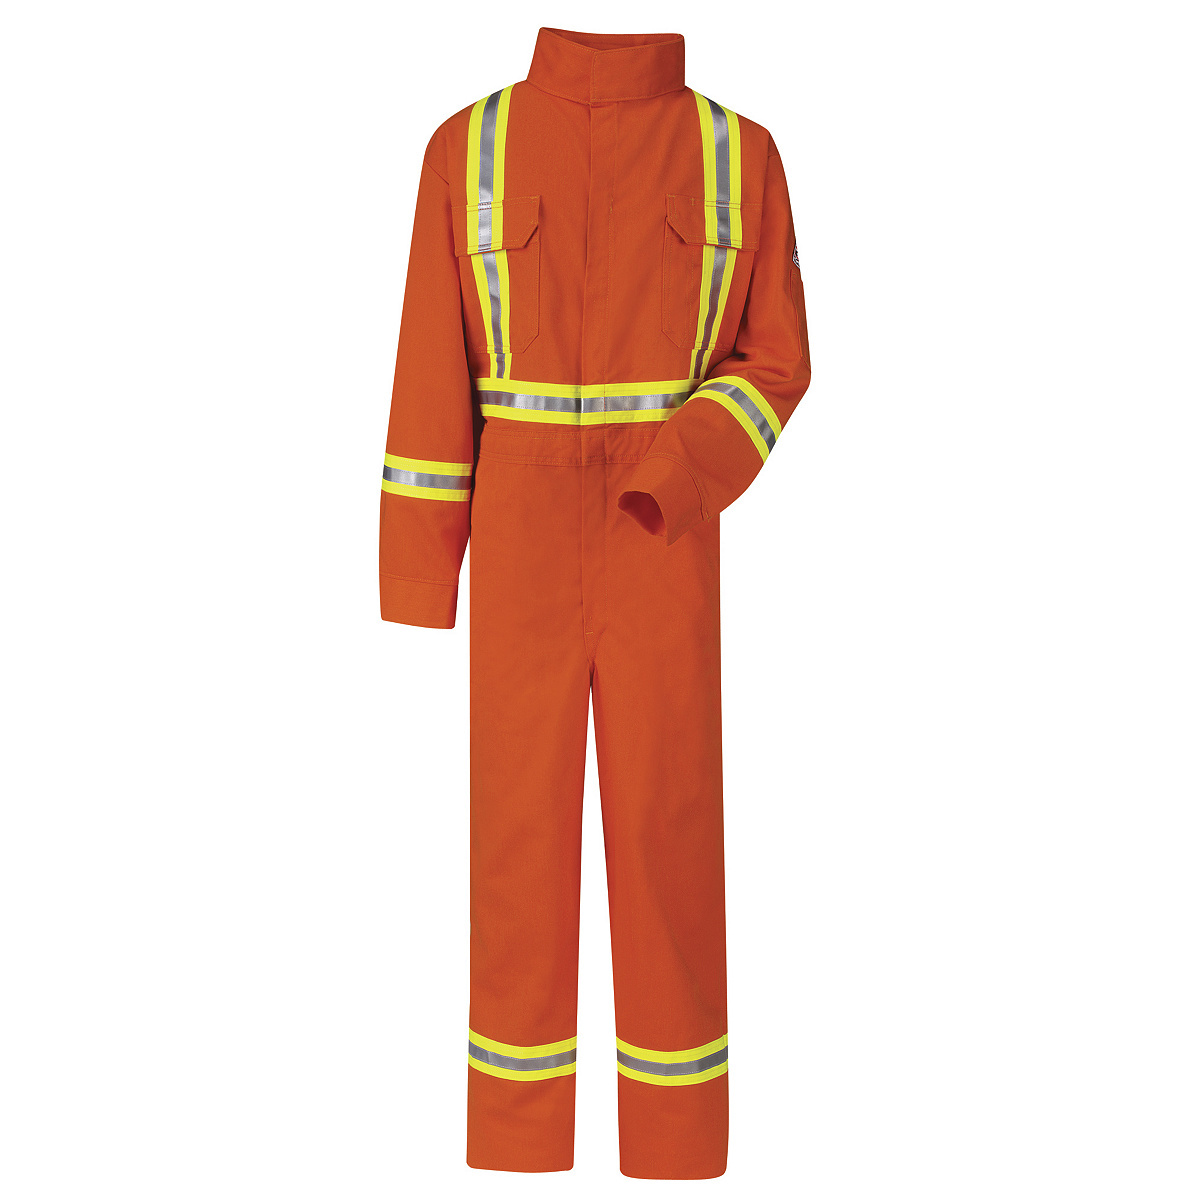 Bulwark® 56 Regular Orange Westex Ultrasoft® Twill/Cotton/Nylon Flame Resistant Coveralls With Zipper Front Closure And Reflecti